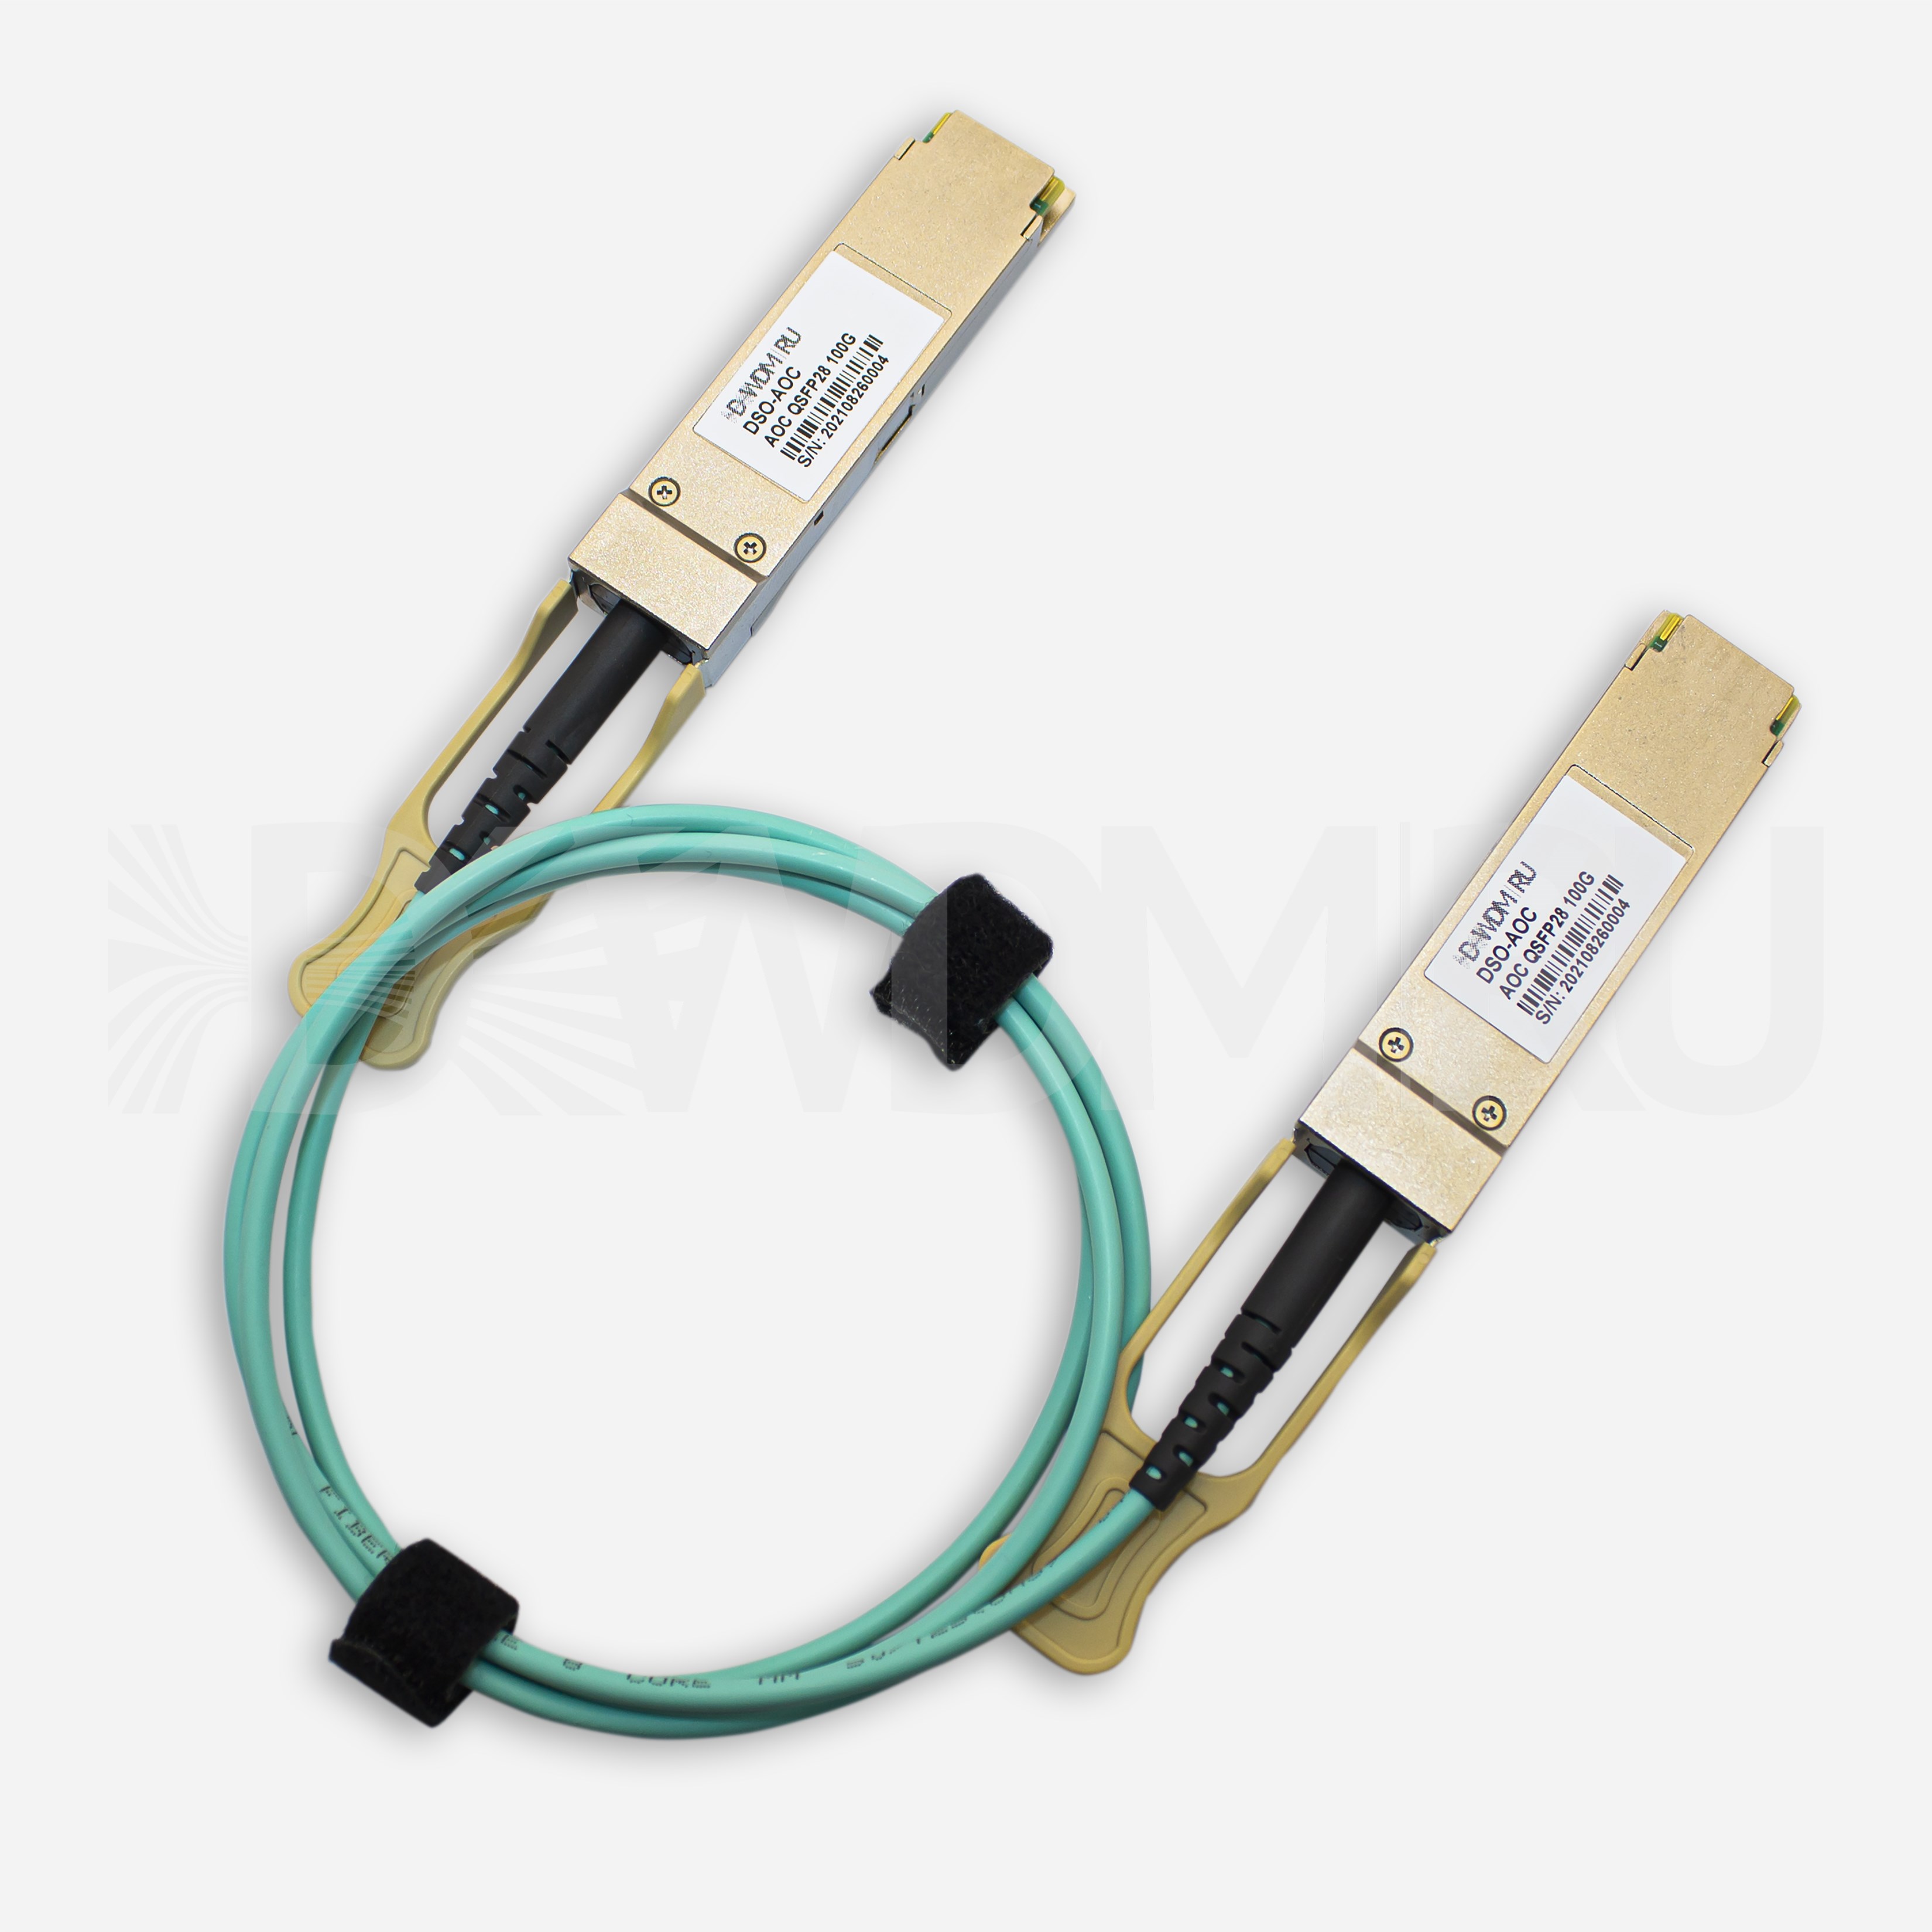 Active Optical Cable, QSFP28, 100 Гб/с, 1 м- ДВДМ.РУ (DSO-AOC-100-1)